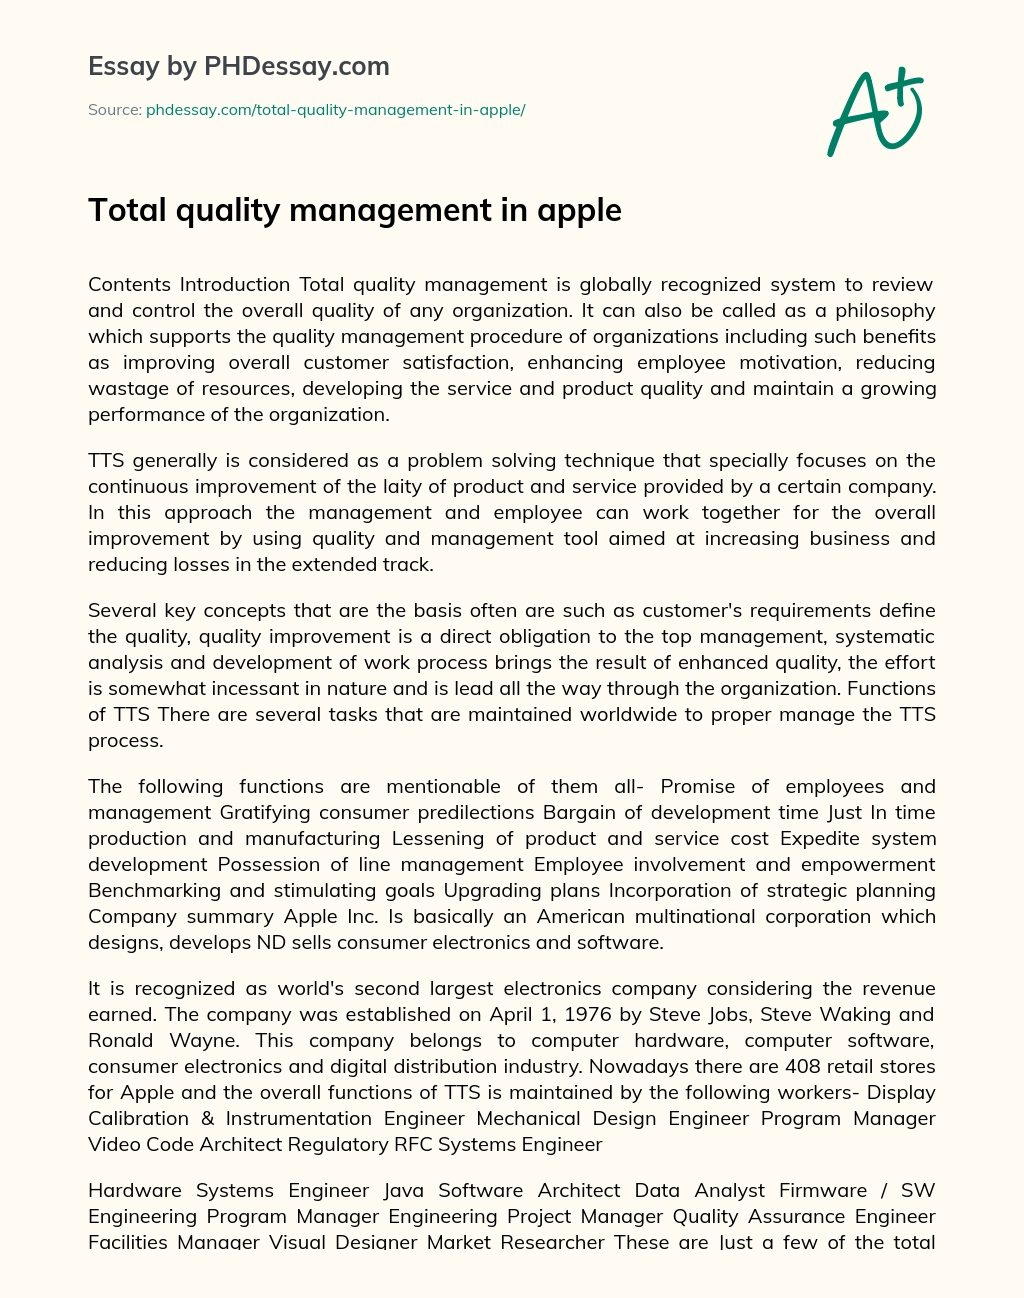 Total Quality Management in Apple essay